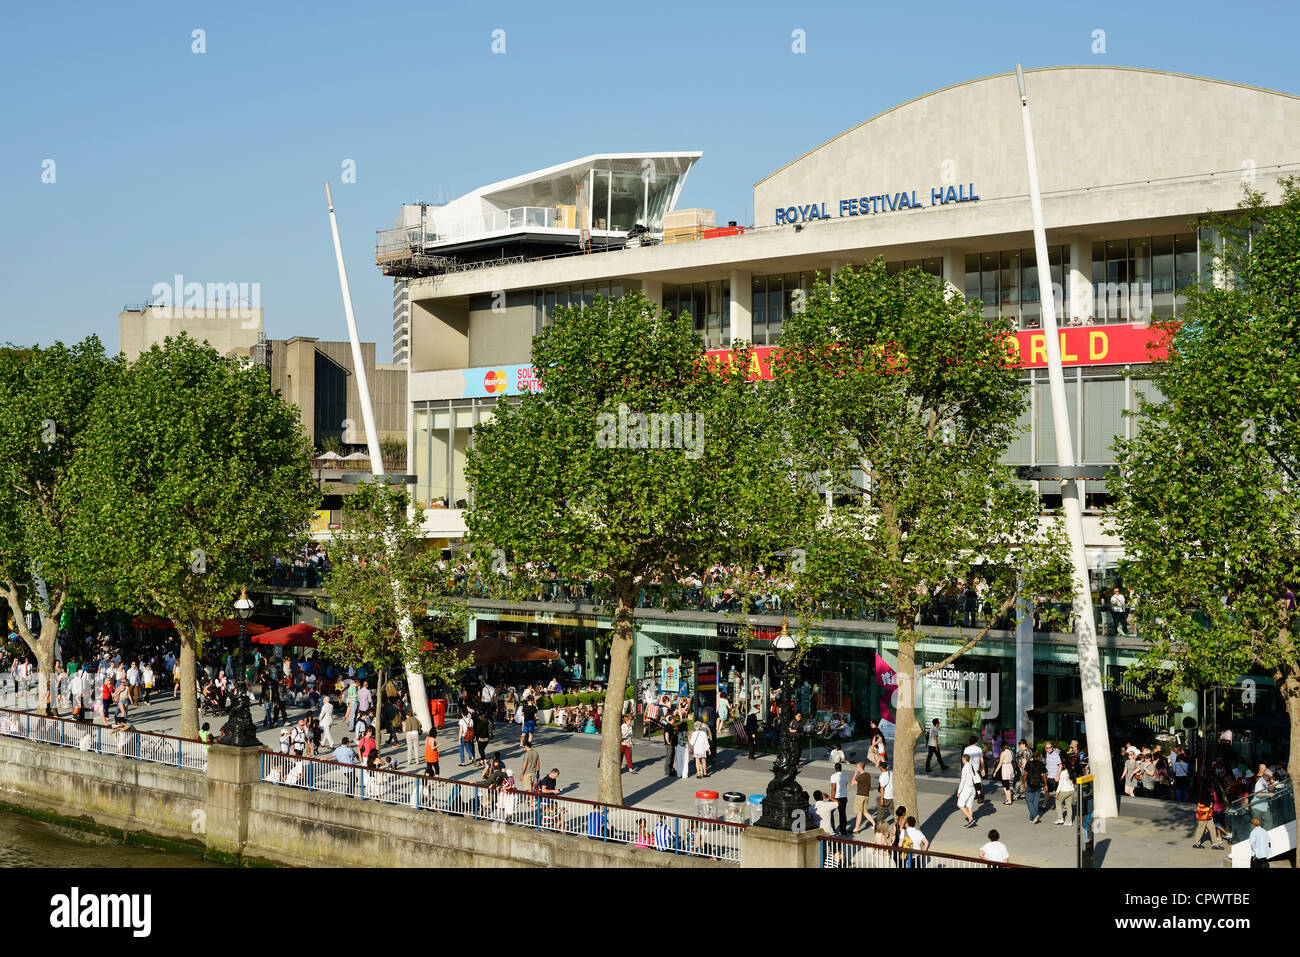 The Royal Festival Hall on the banks of the River Thames in London Stock Photo